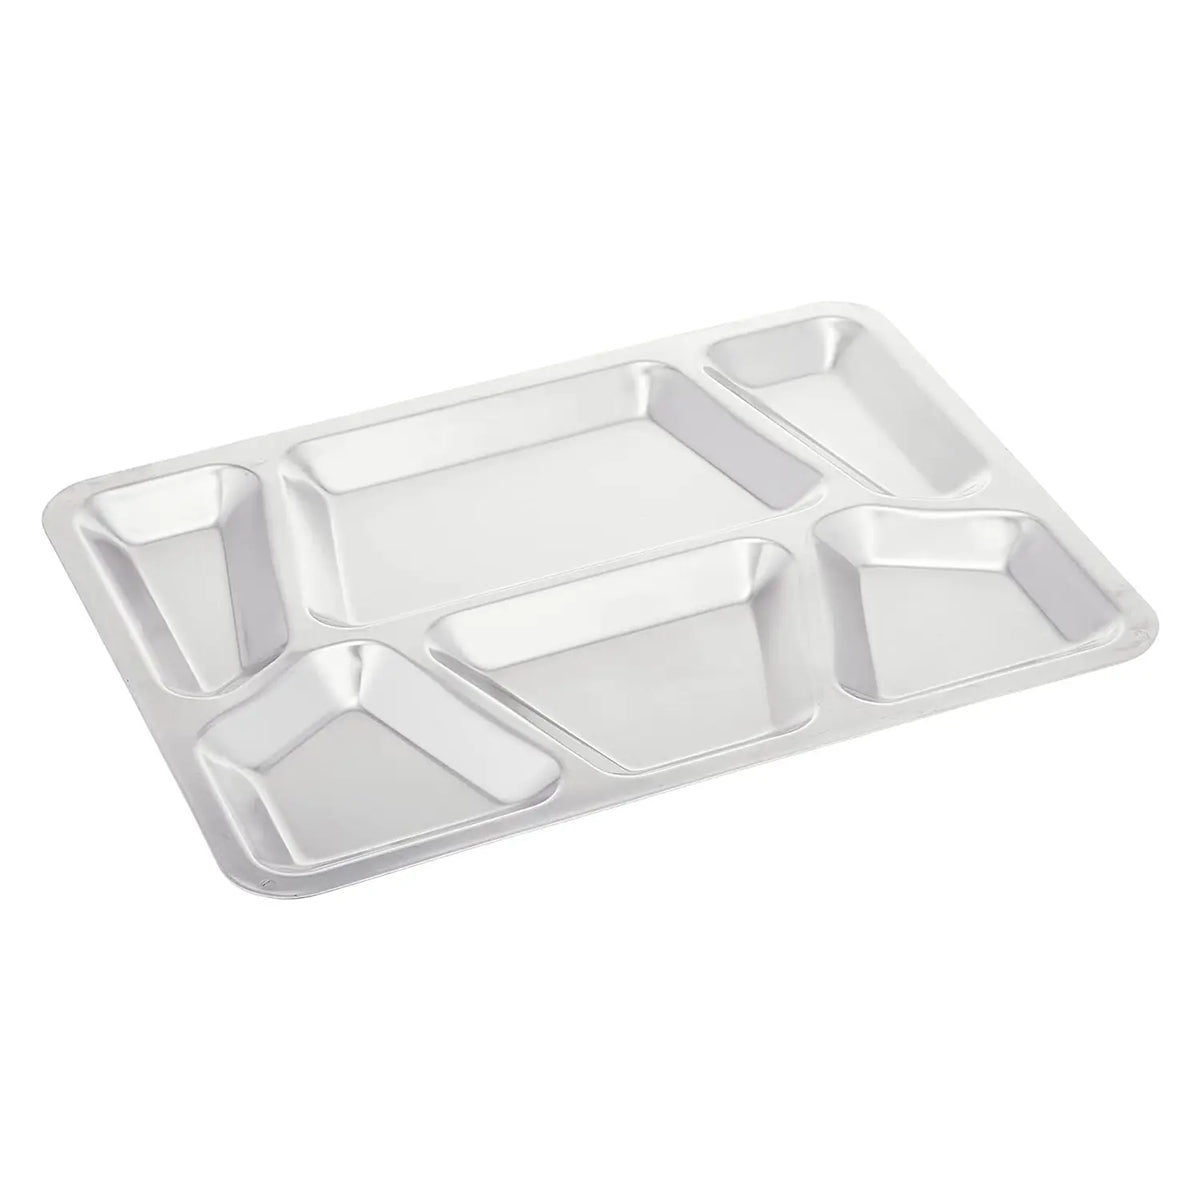 Nihon Metal Works Stainless Steel Antibacterial 6 Compartments Lunch Tray